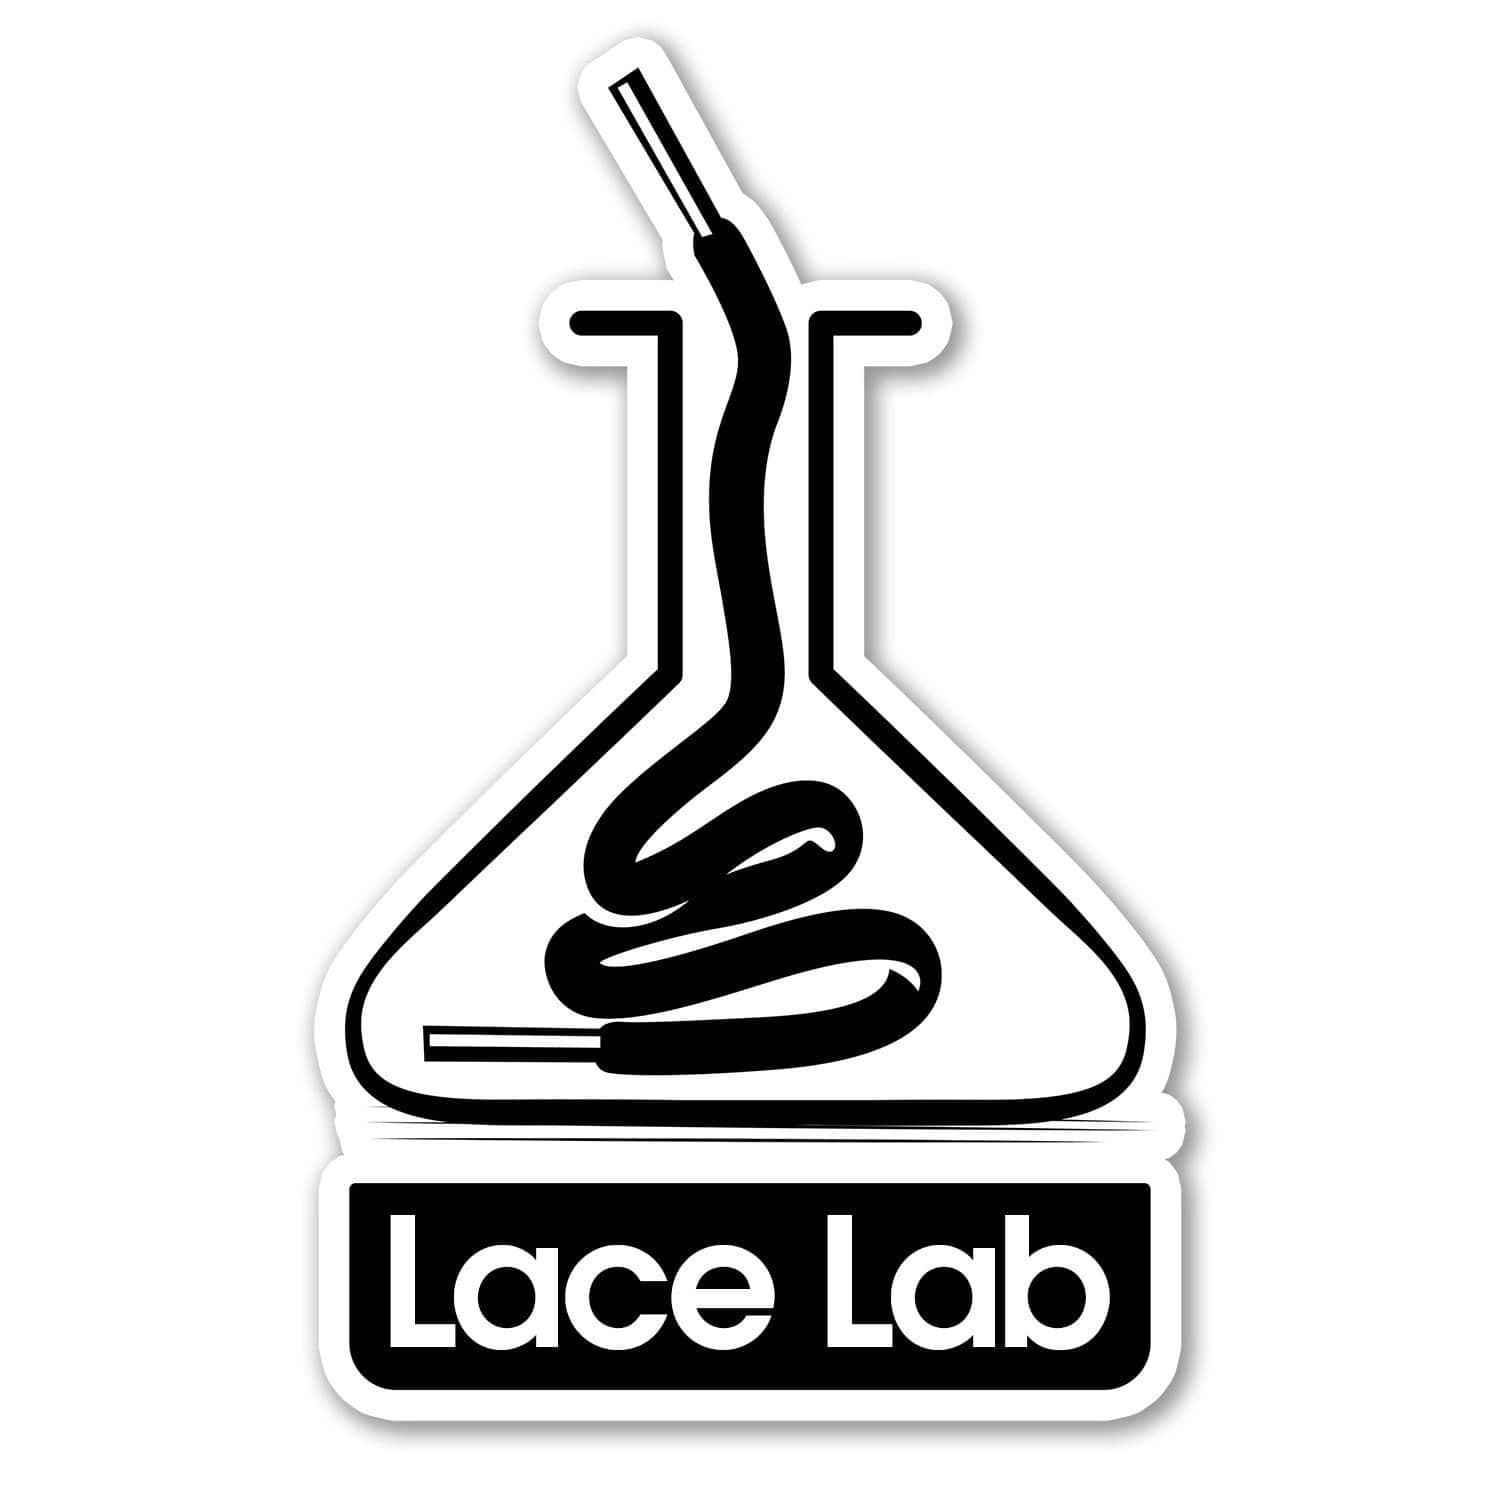 Get More Lace Lab Deals And Coupon Codes